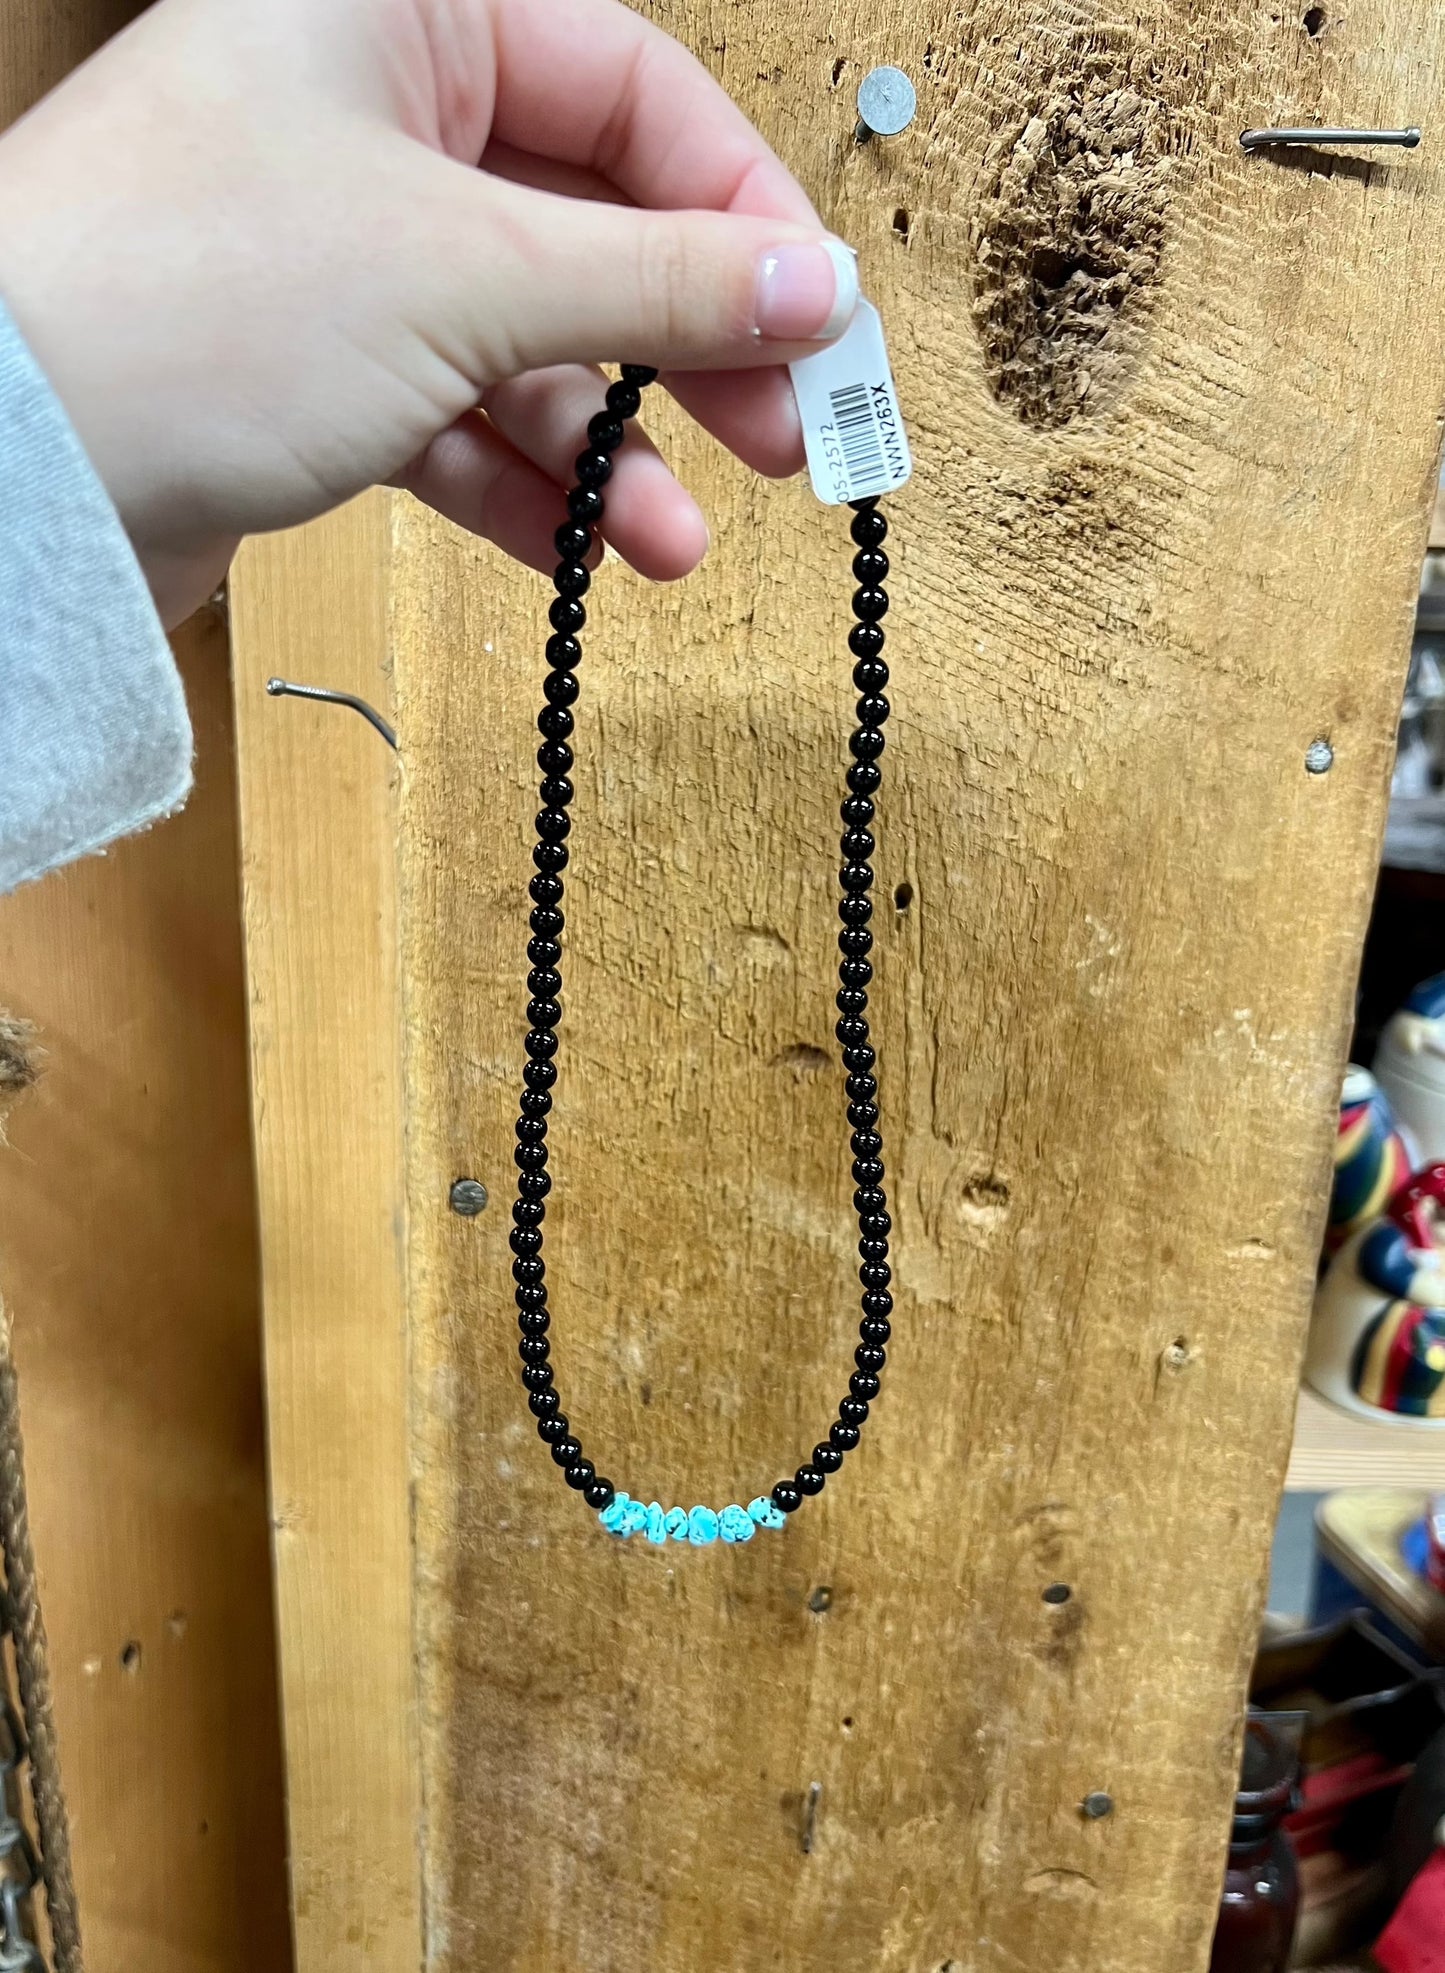 Turquoise and Black Onyx Necklace